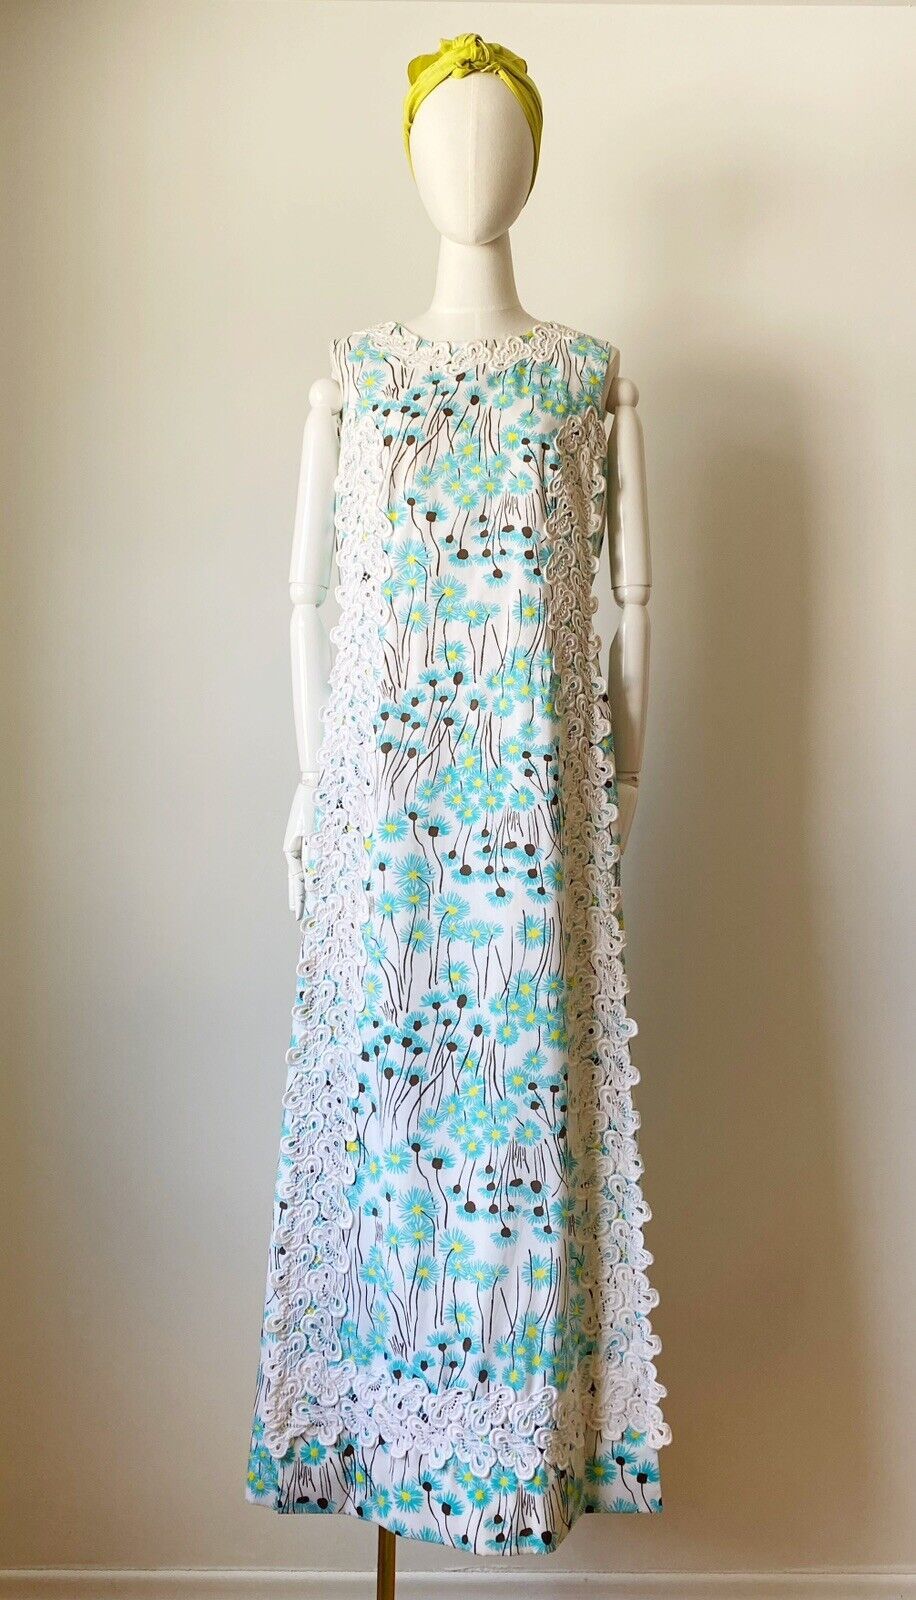 PALM ROYALE The Lilly Lilly Pulitzer Maxi Dress Dandelion Yellow Turquoise  | eBay | eBay US